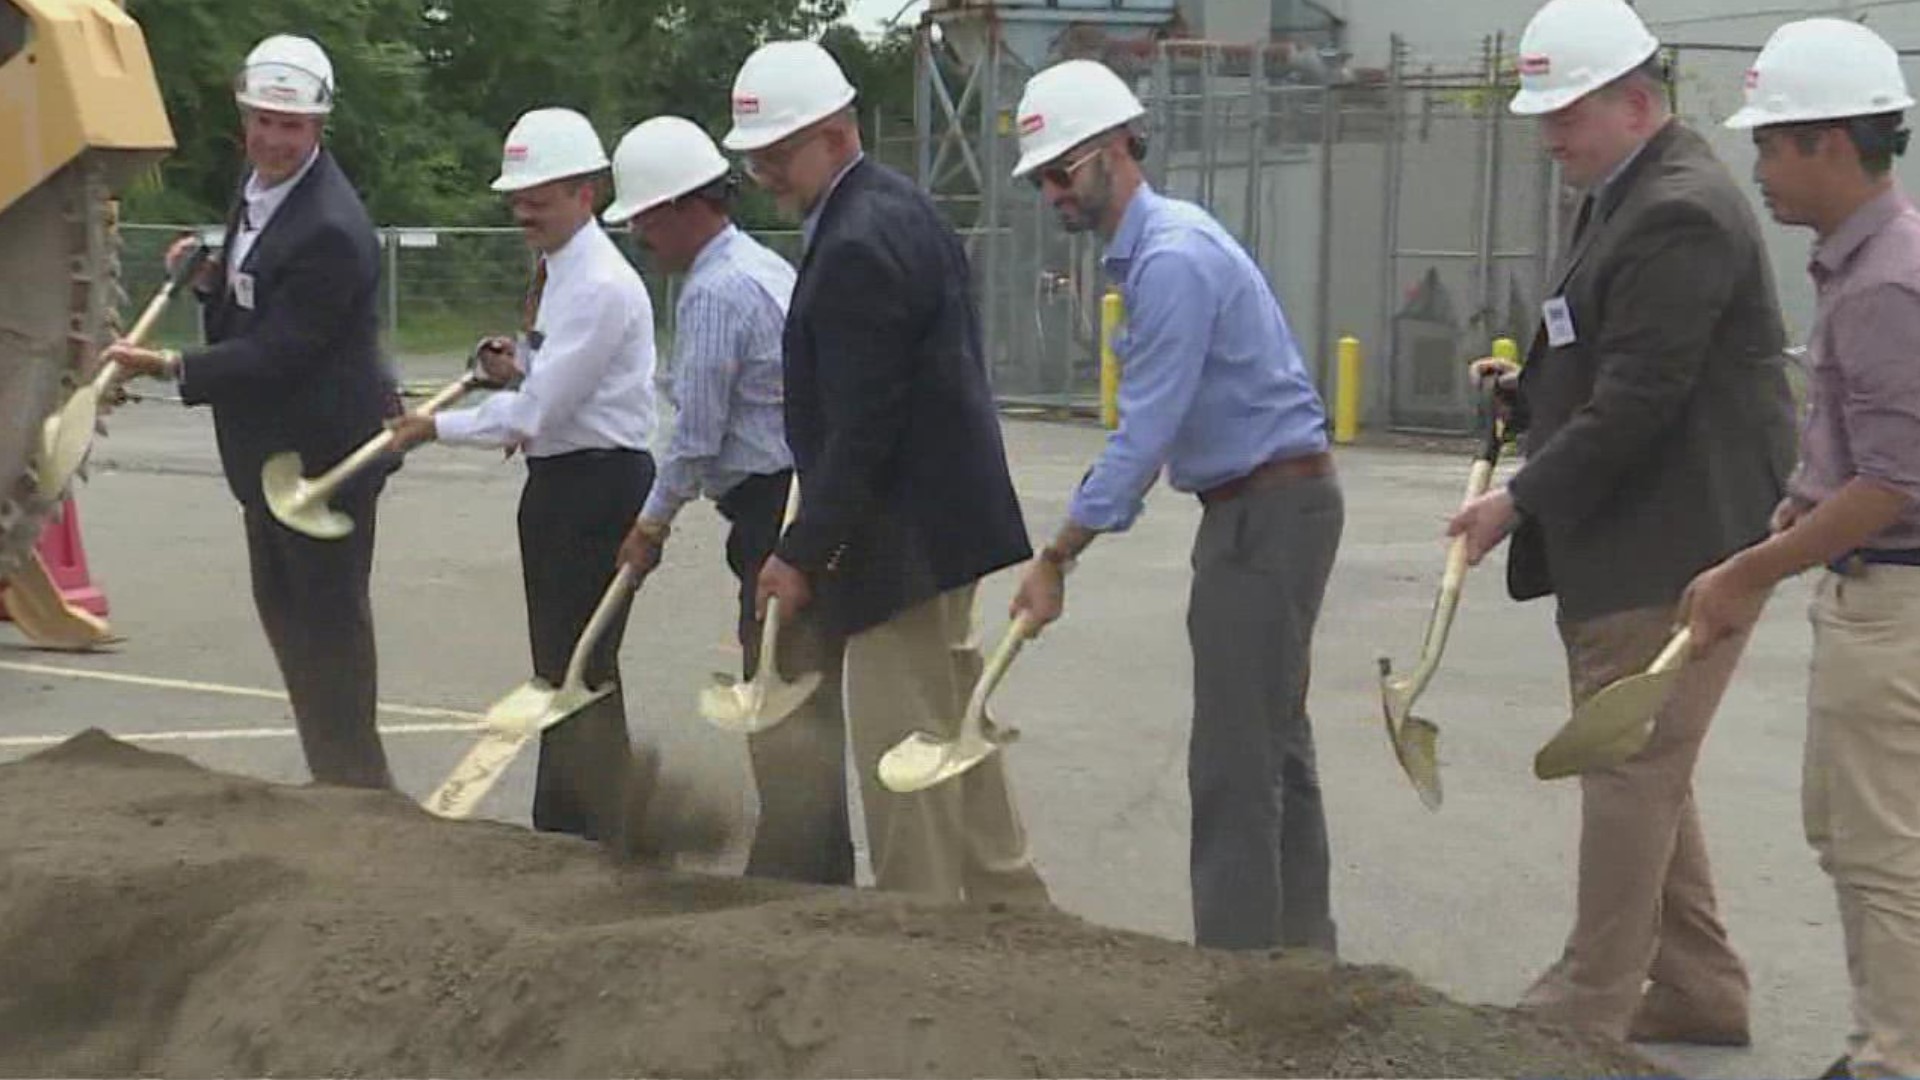 Surmet is beginning work on a 13-and-a-half million dollar expansion to its Hertel Avenue facility for ceramics manufacturing with new equipment and renovations.